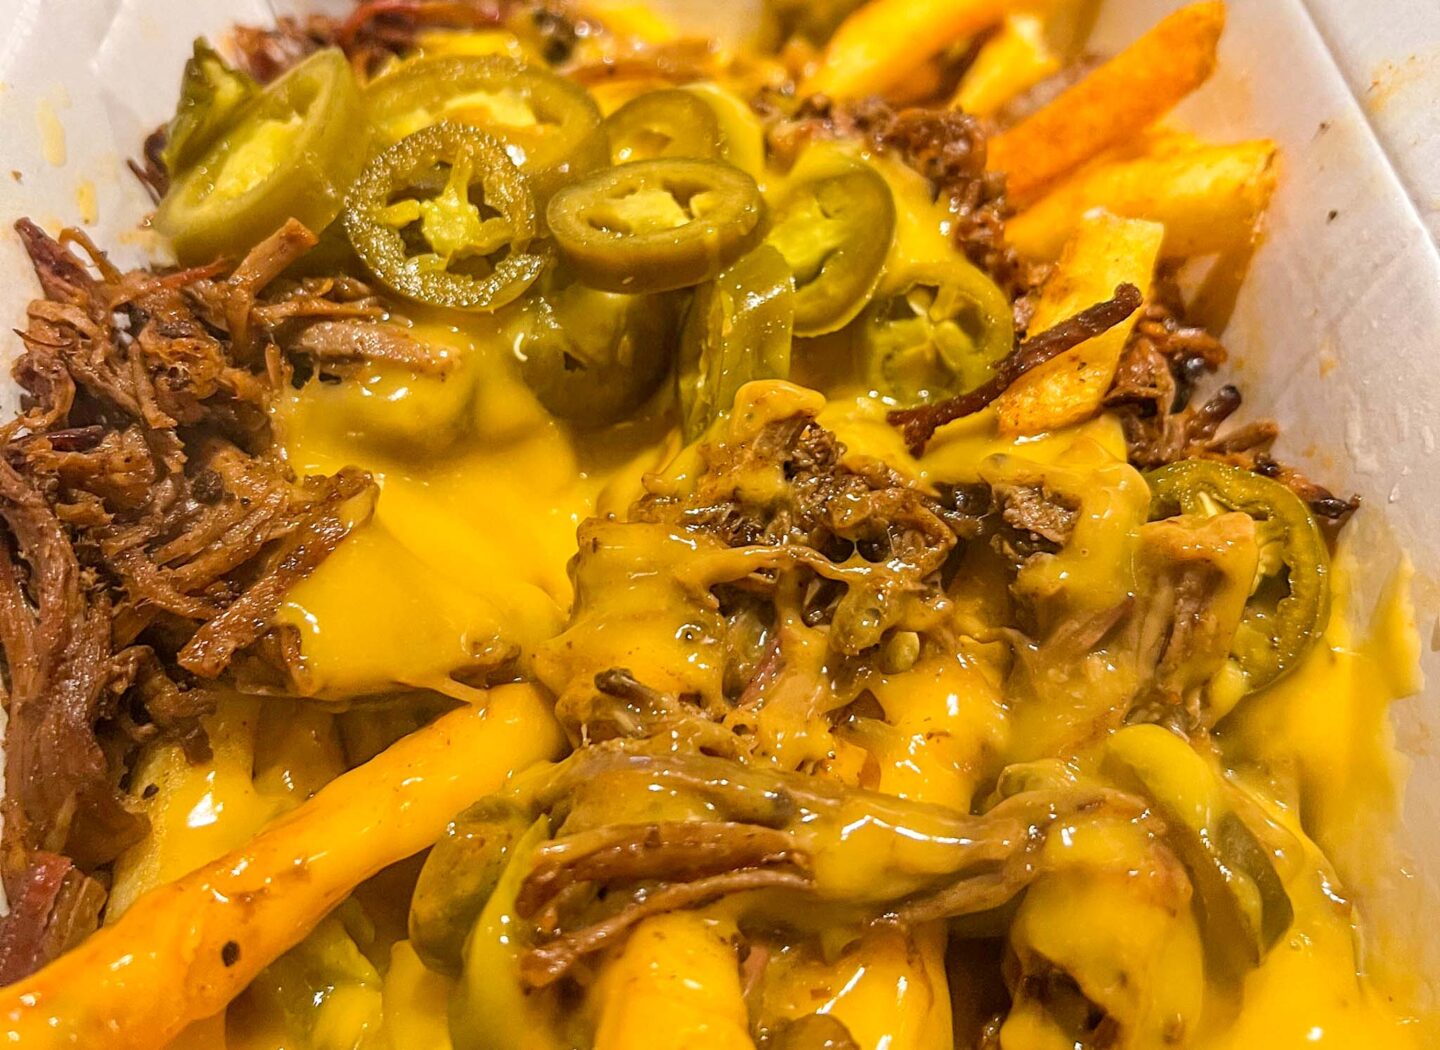 halal restaurants in manchester, Pitmaster Brisket and cheese fries